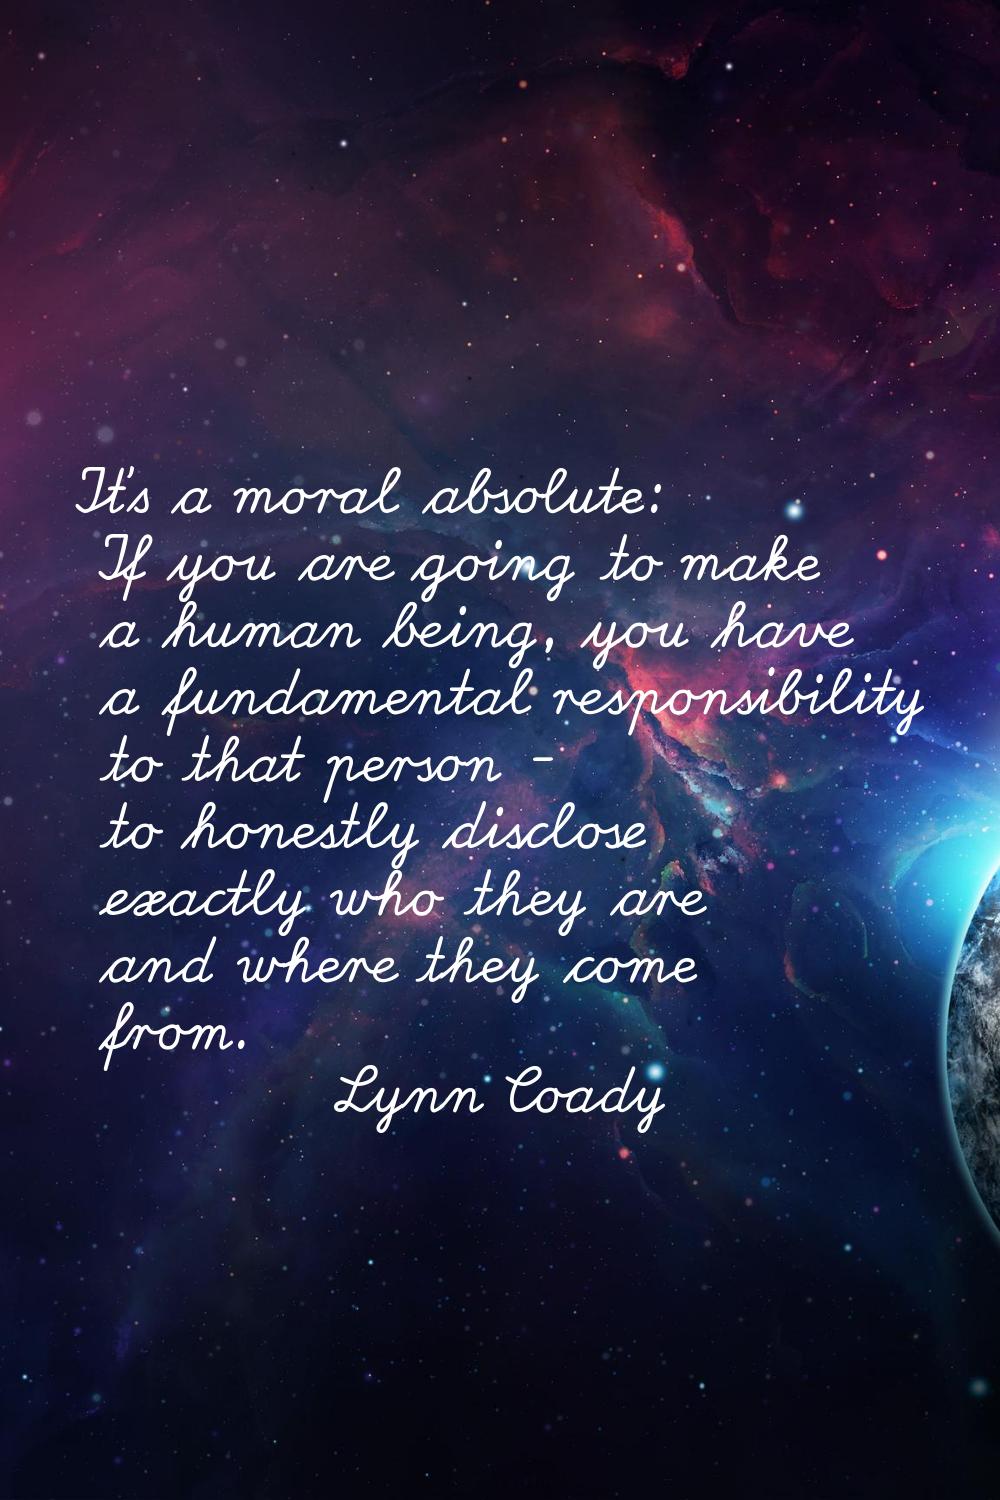 It's a moral absolute: If you are going to make a human being, you have a fundamental responsibilit